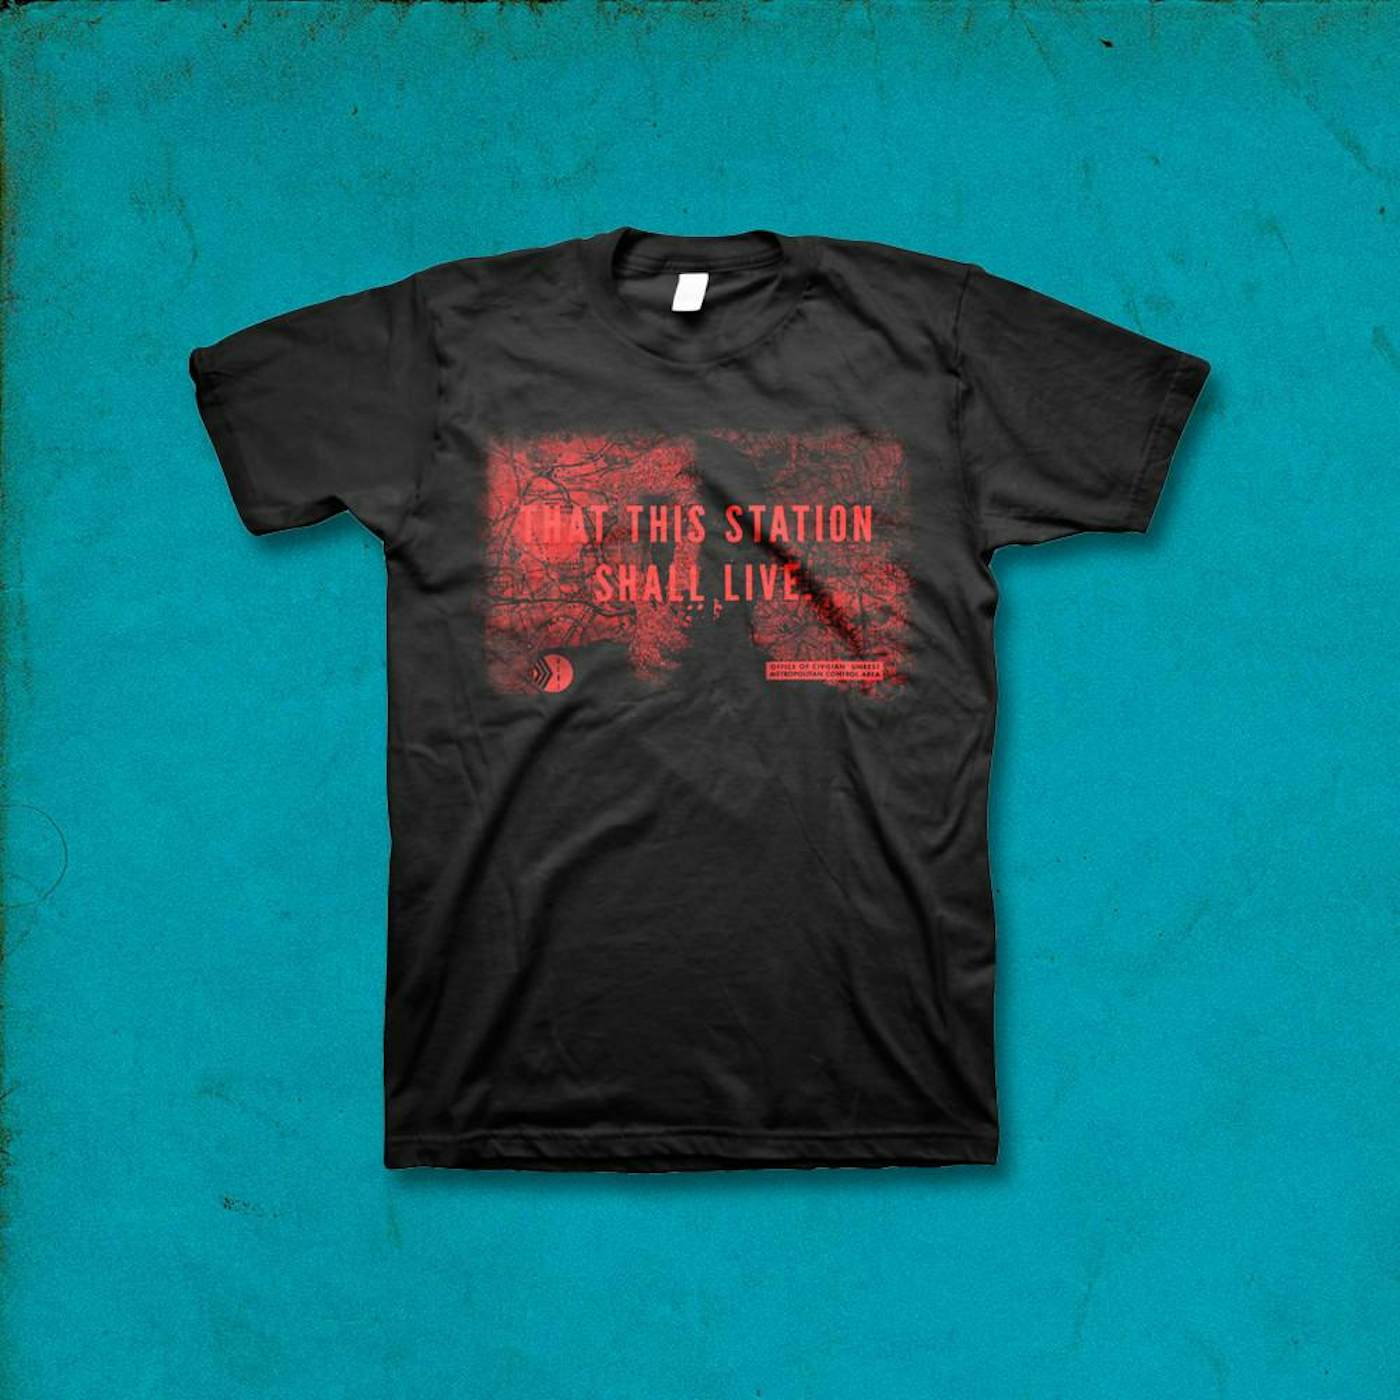 At the Drive-In Station T-shirt